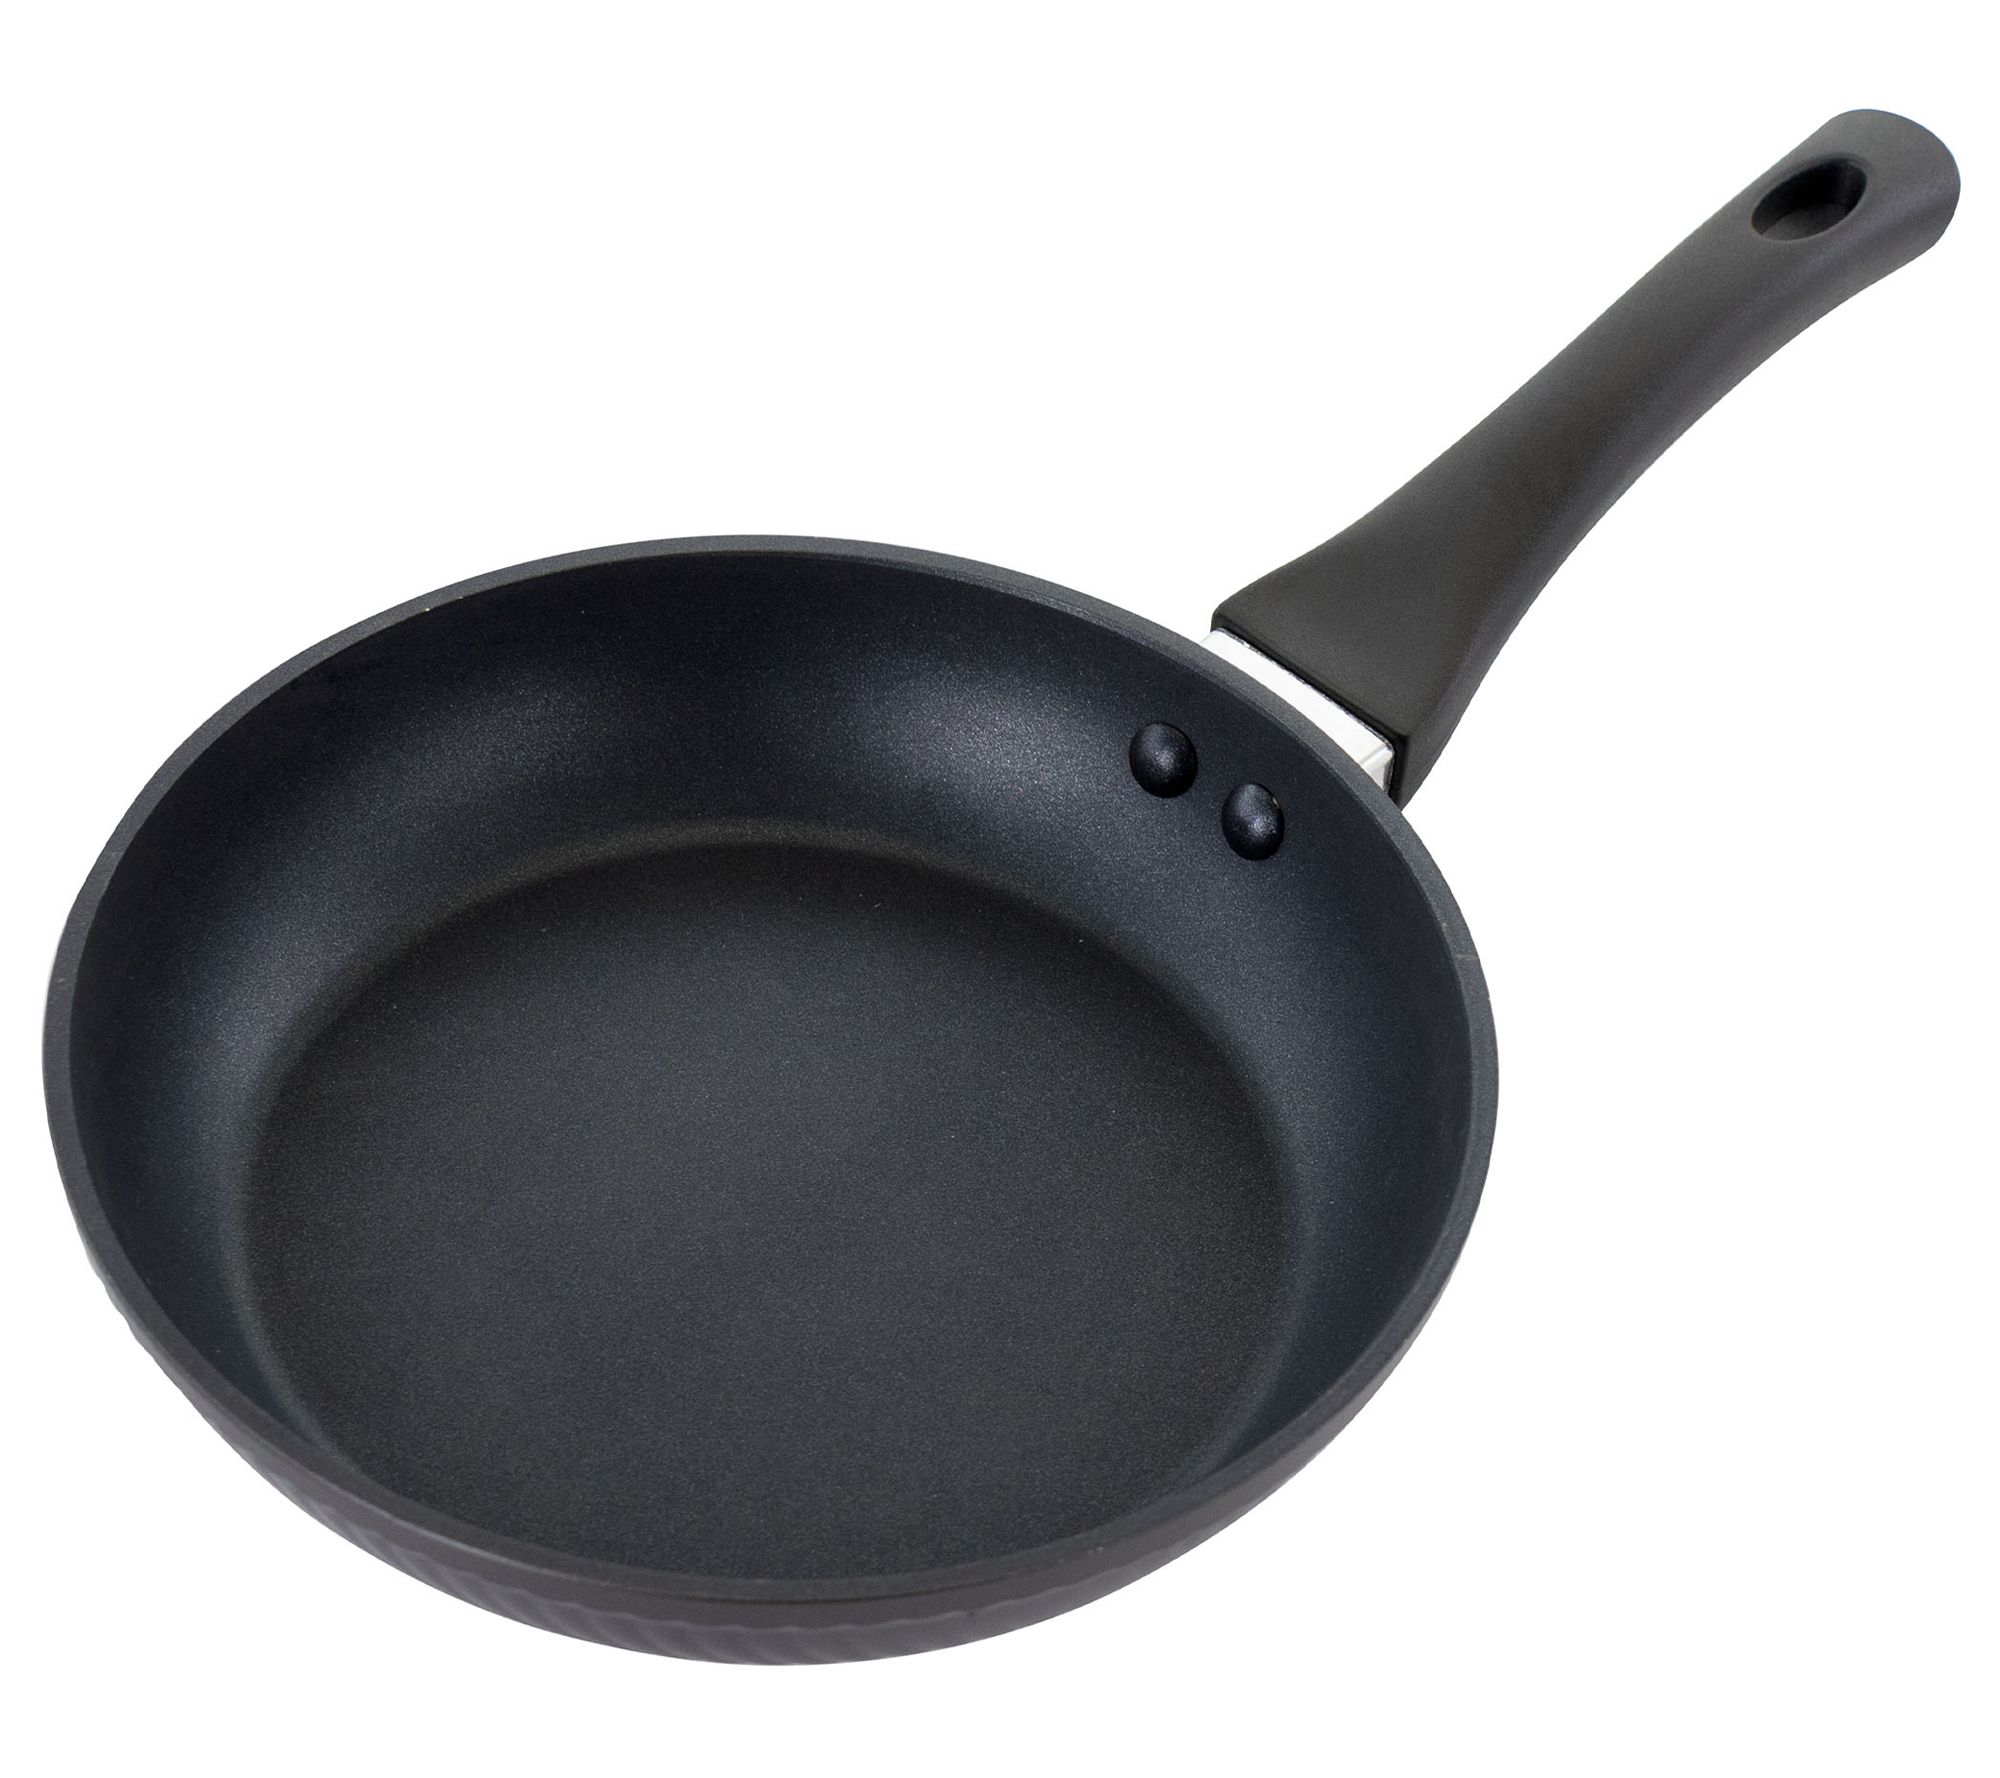 Oster Claybon 8 inch Aluminum Nonstick Frying Pan in Speckled Red